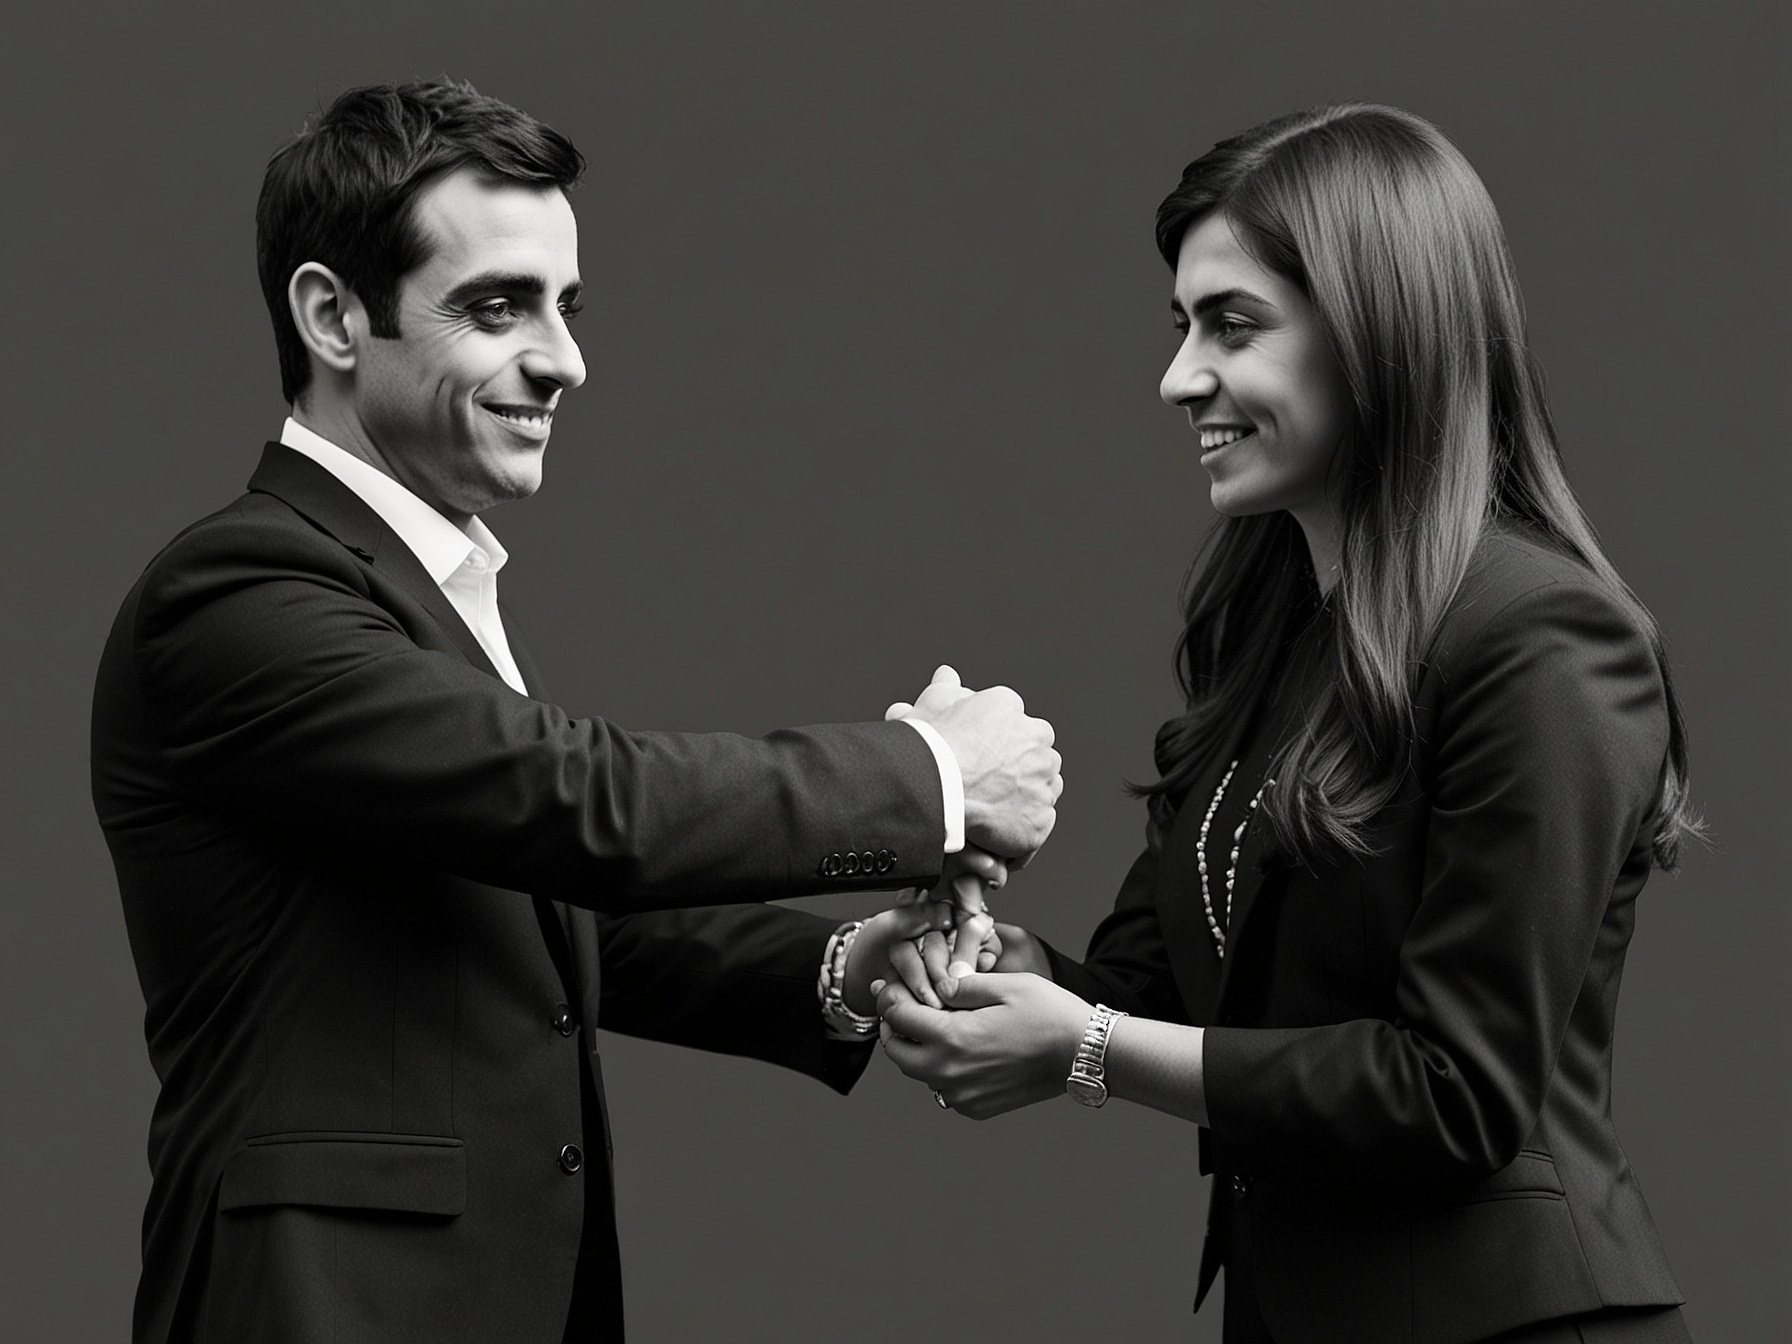 Ronnie O'Sullivan, the seven-time world snooker champion, poses with Faiza Shaheen during a campaign event, showcasing their united front and mutual support for social justice and economic equality.